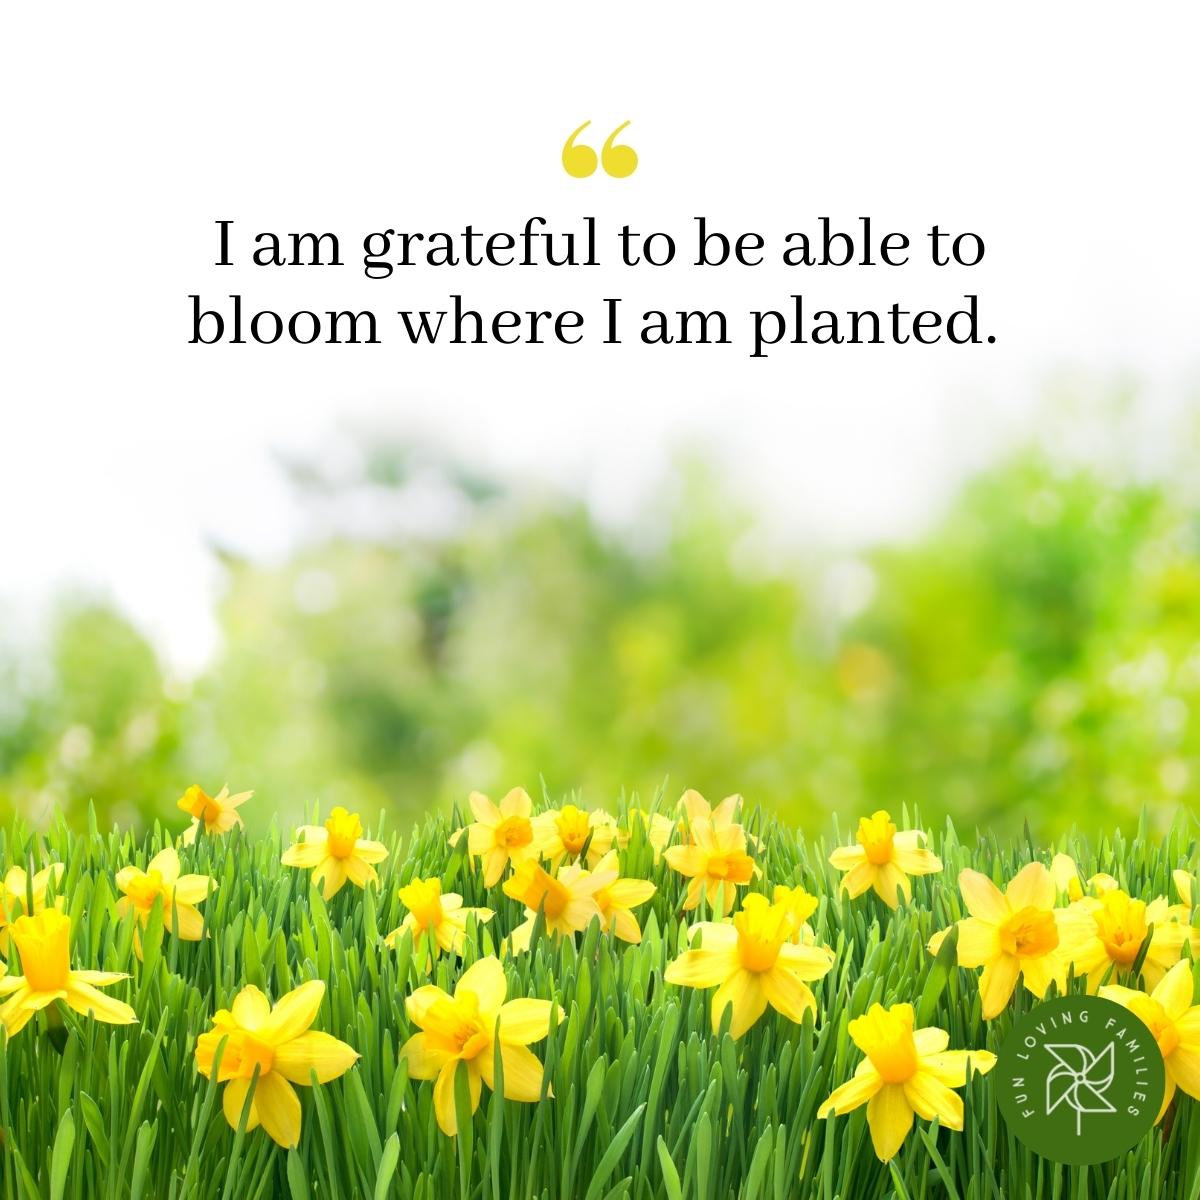 I am grateful to be able to bloom where I am planted affirmation